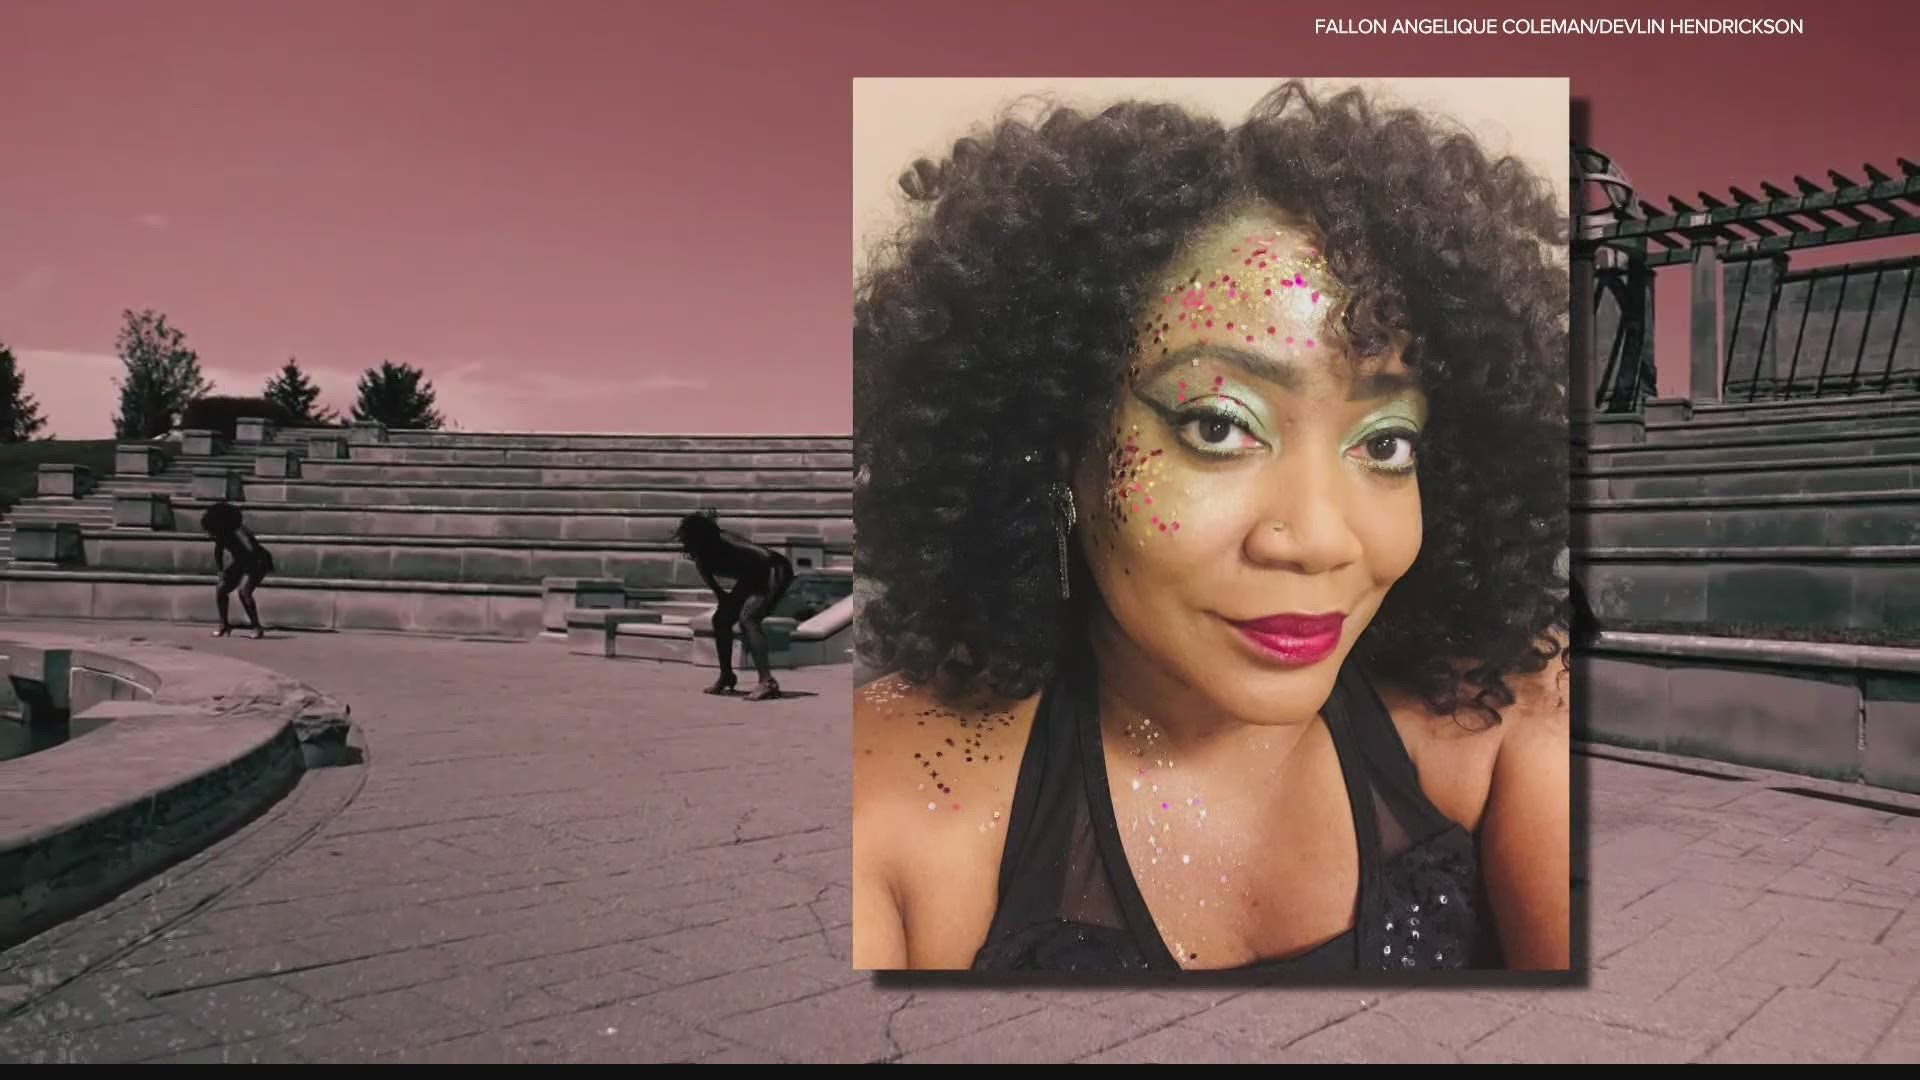 Melyssa Sams said dancing helps her come to grips with an unrelenting coronavirus pandemic.